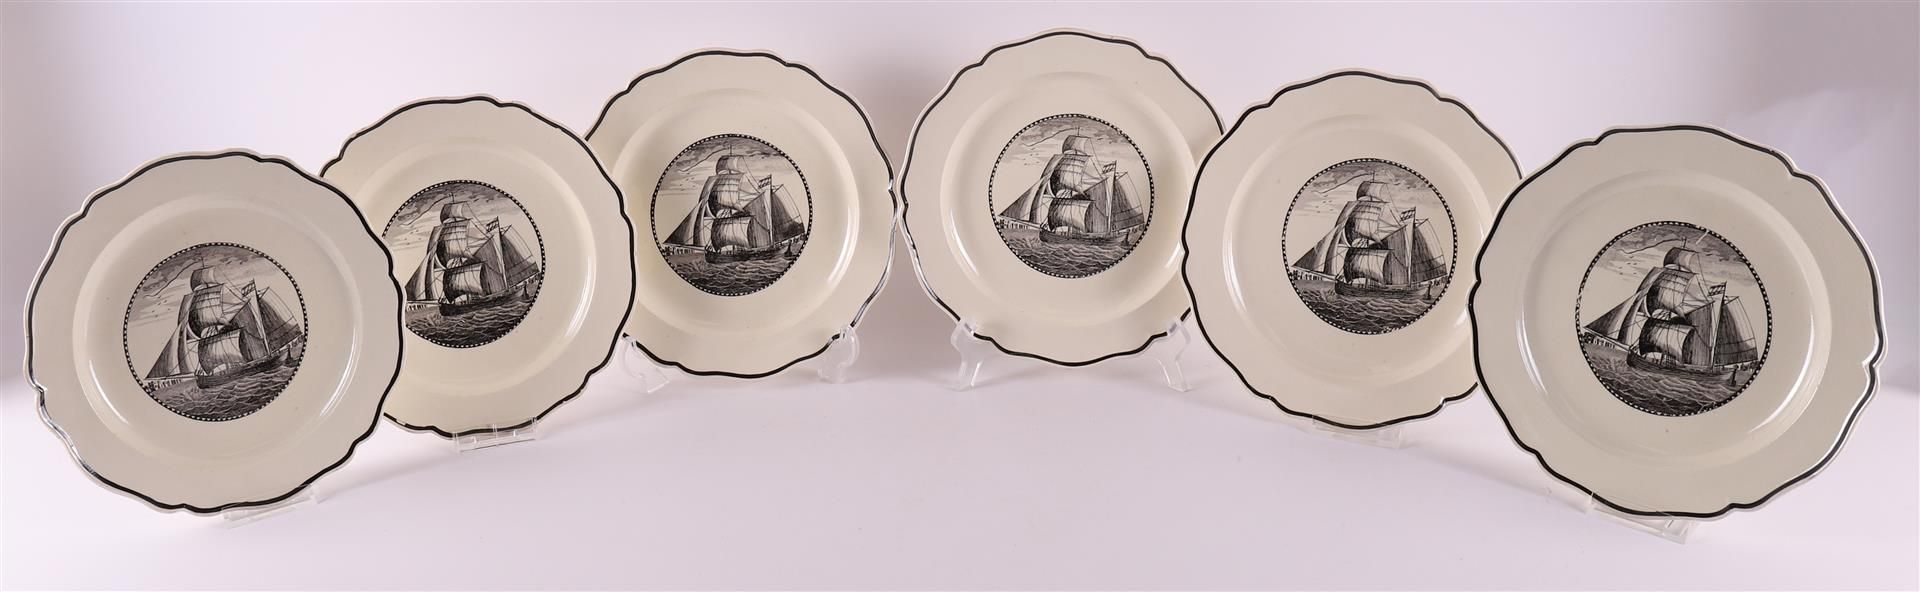 A series of six earthenware contoured plates, England, 18th century.